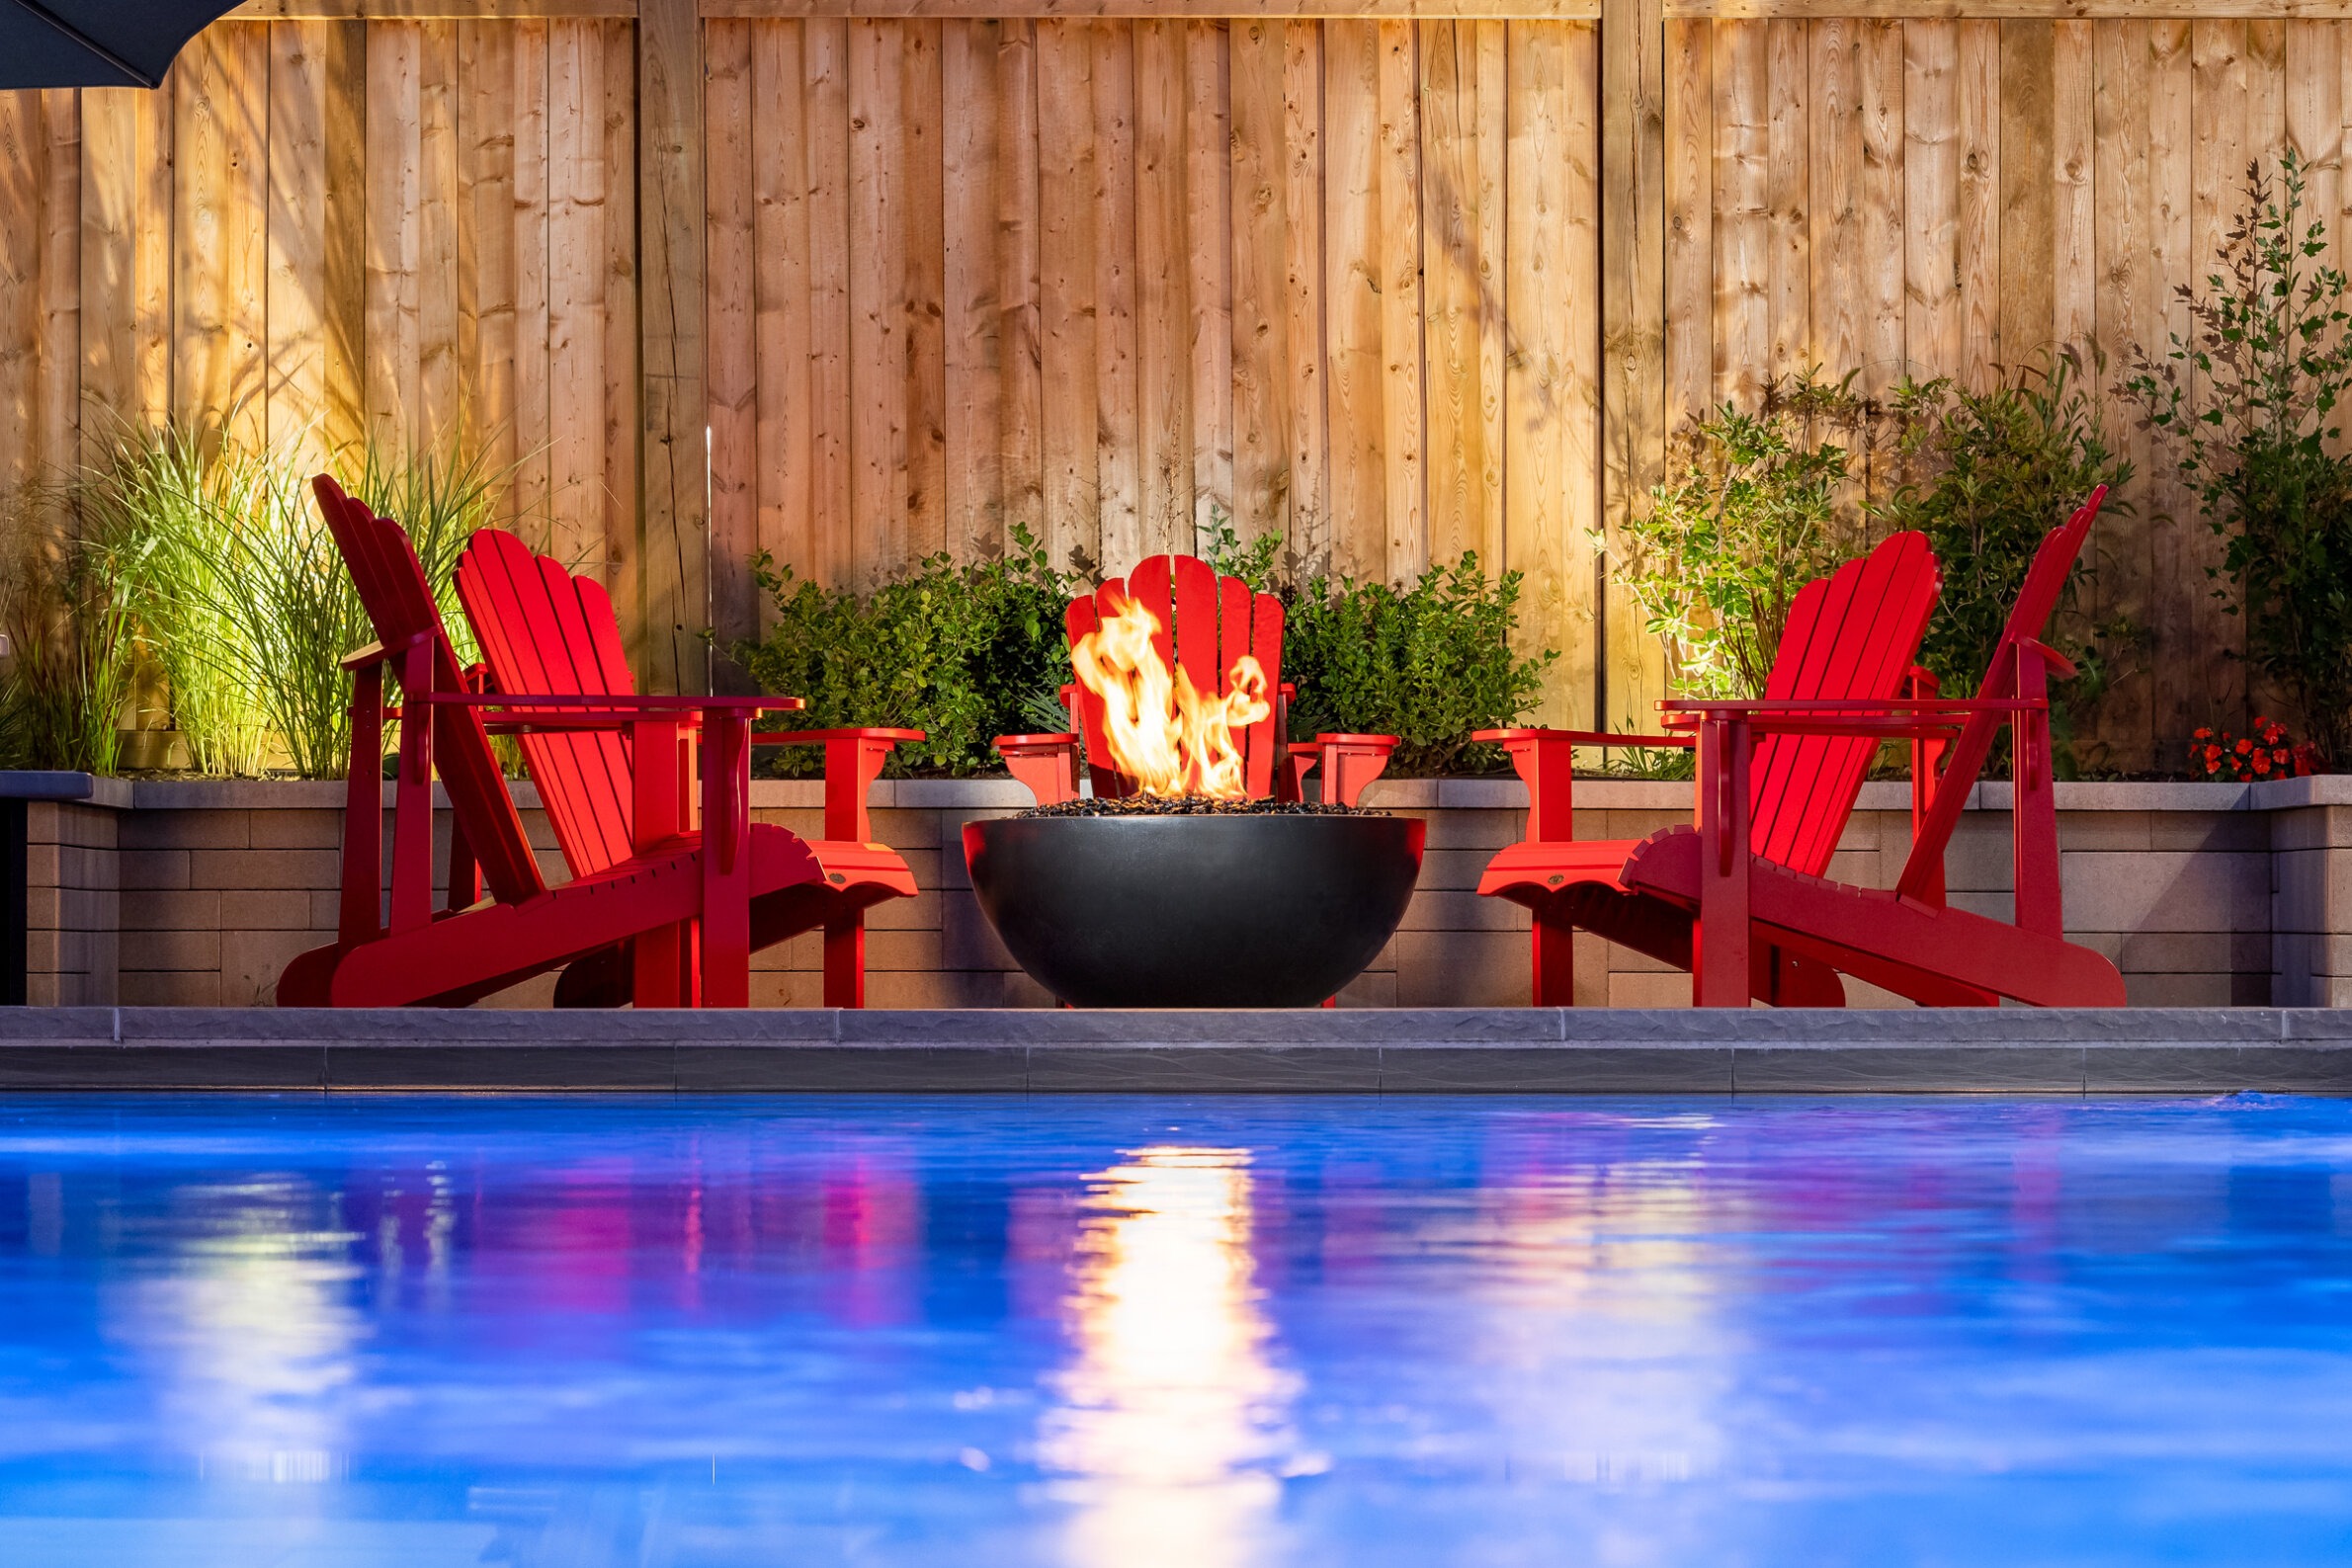 Two red Adirondack chairs face a fire pit with glowing flames, beside a pool with blue reflections, and a wooden fence background at dusk.